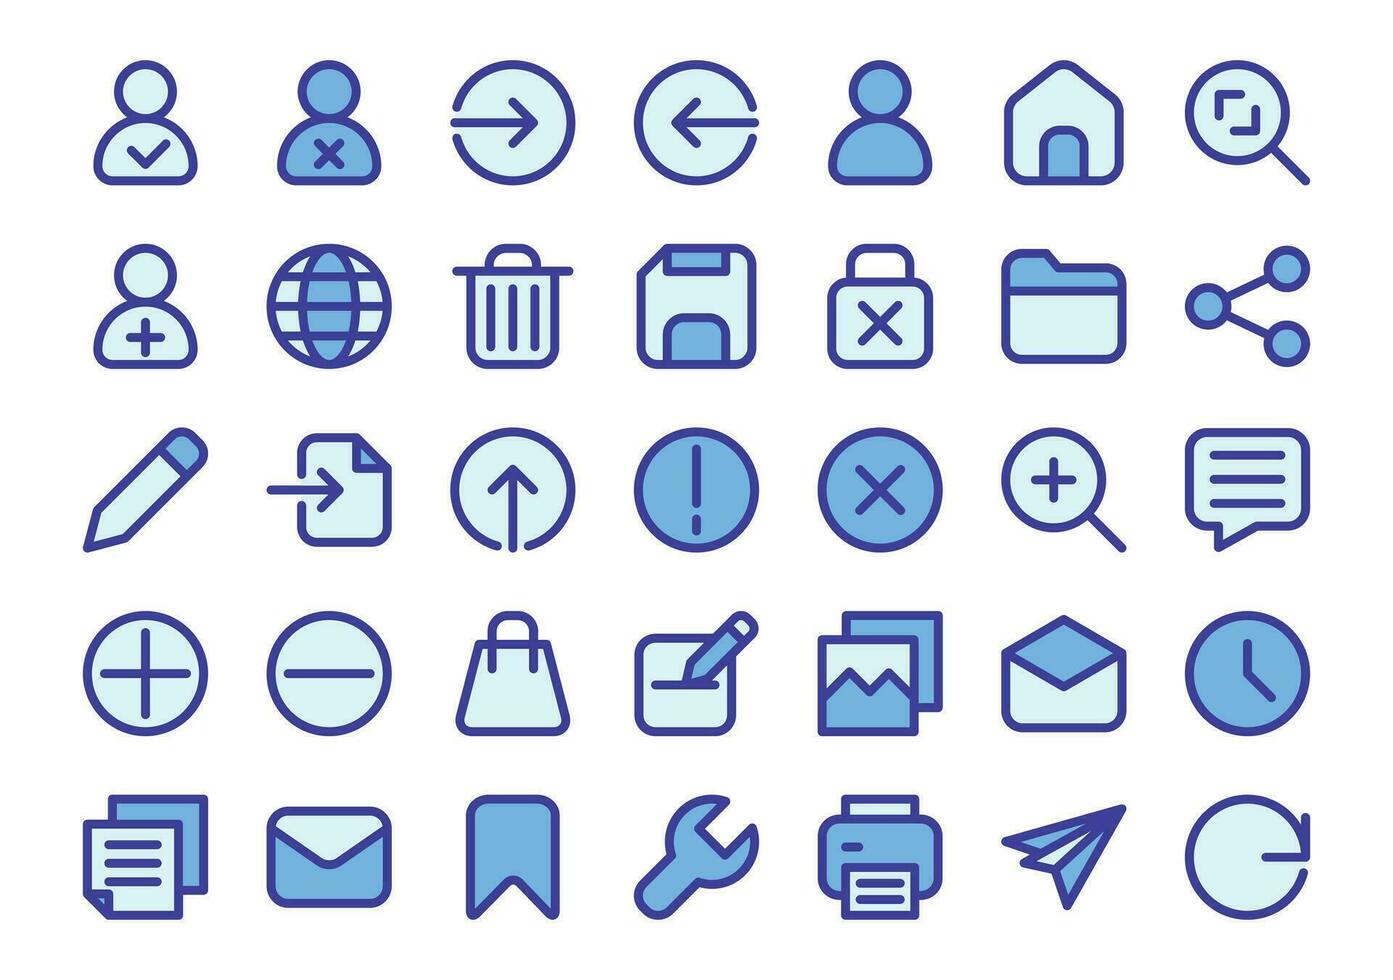 Ui blue colored outline icons set simple perfect.The collection includes in business development, programming, web design, app design, and more. vector